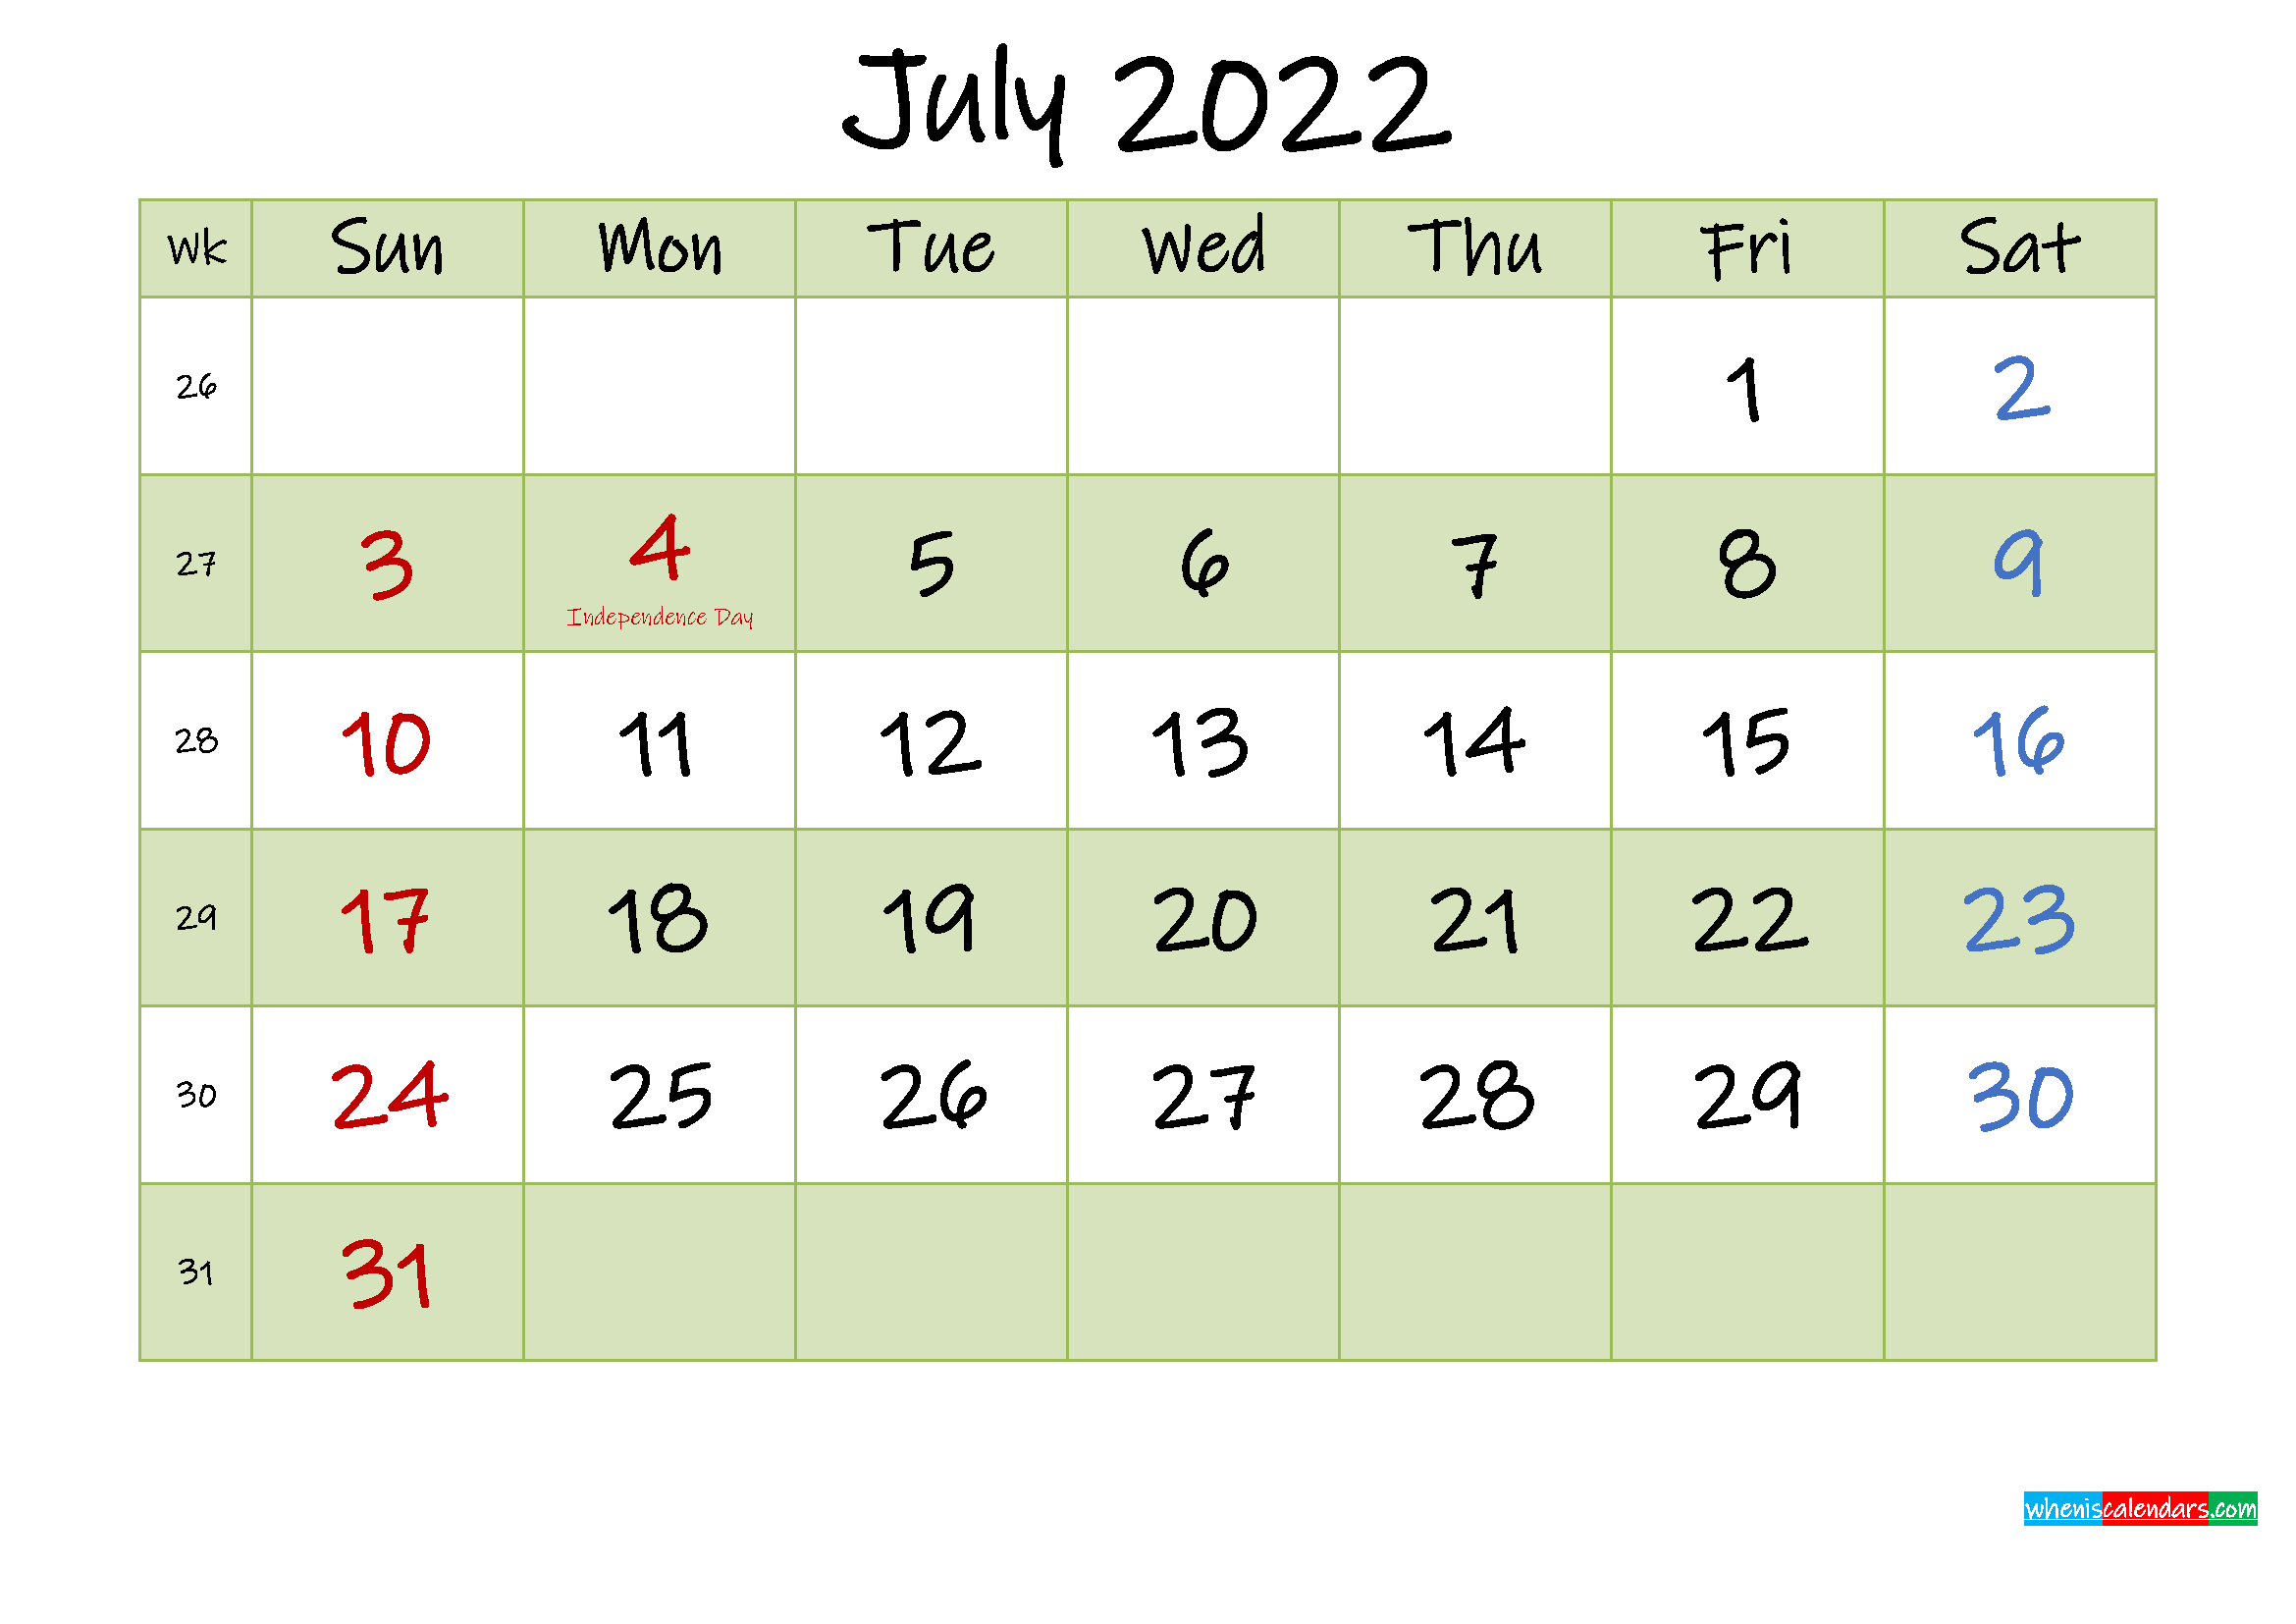 July 2022 Calendar With Holidays Printable - Template No